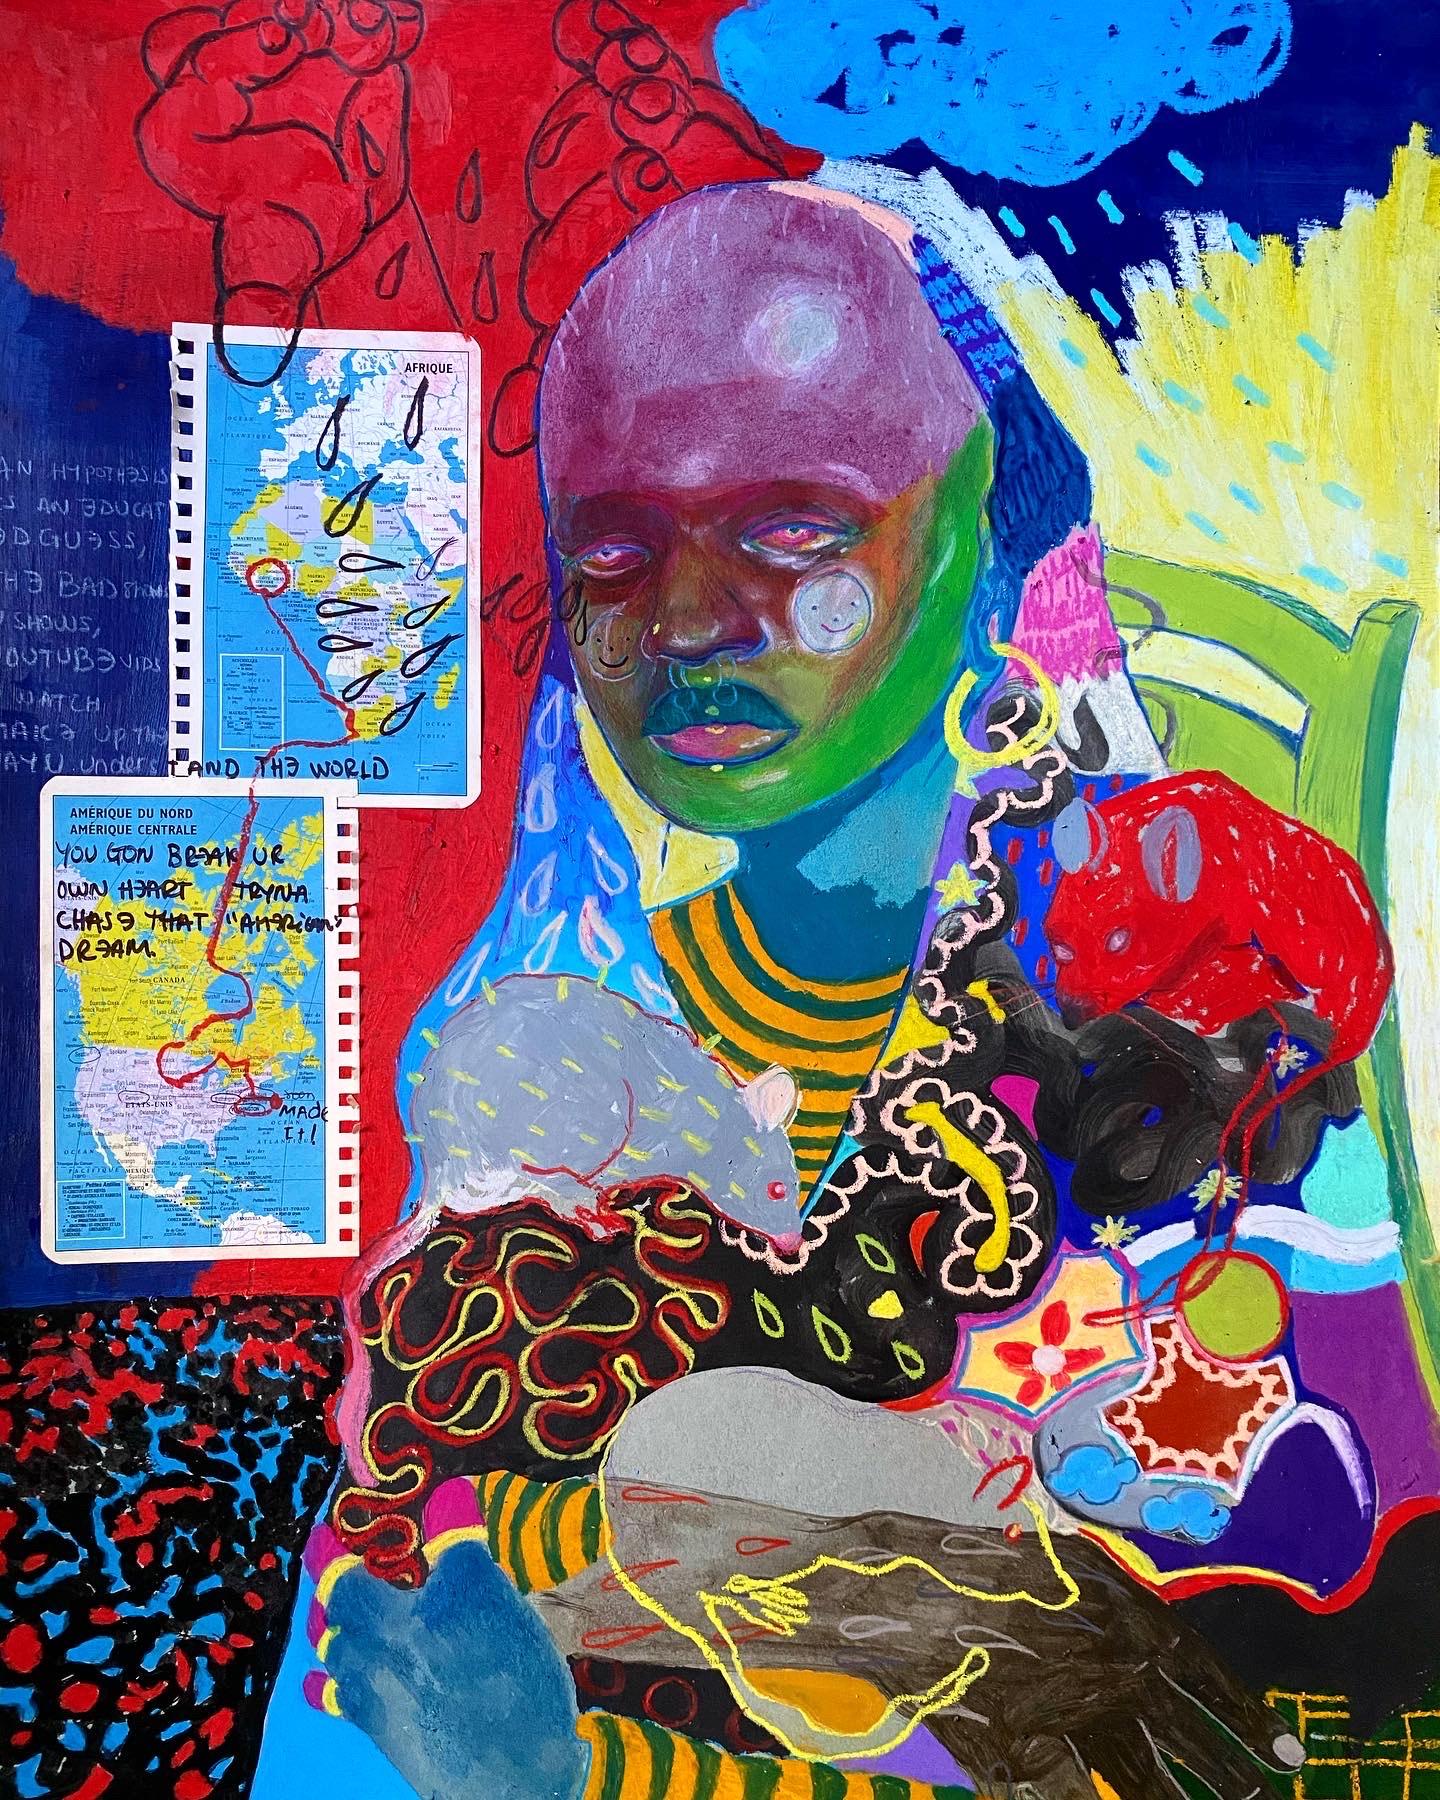 I broke my own heart with a visa: Black African woman w/ rats, text, collage map